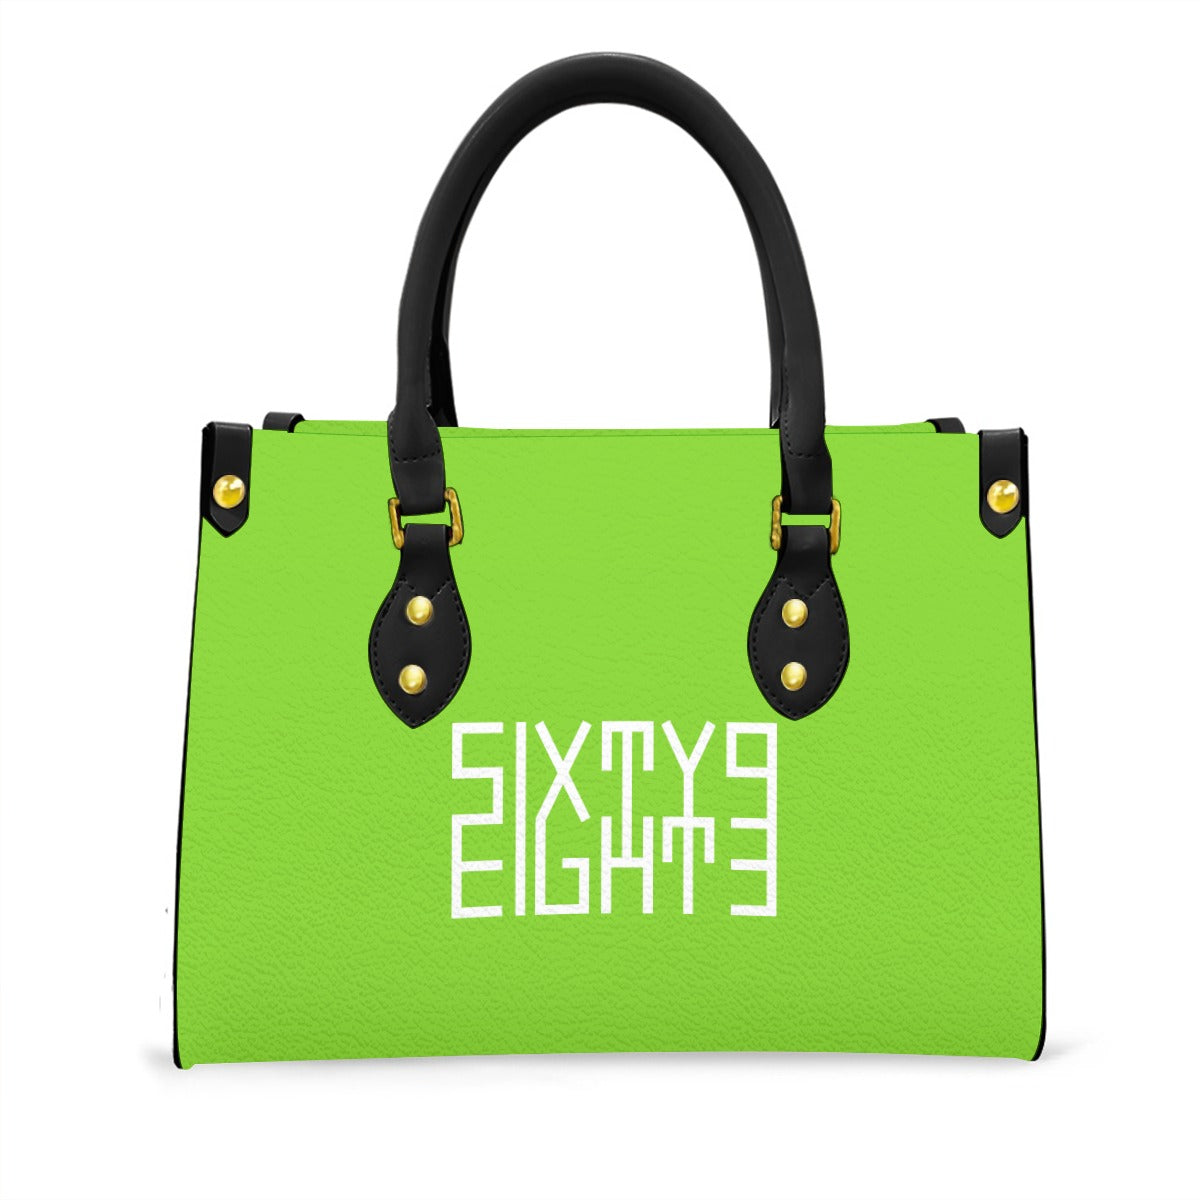 Sixty Eight 93 Logo White Green Apple Women's Tote Bag With Black Handle